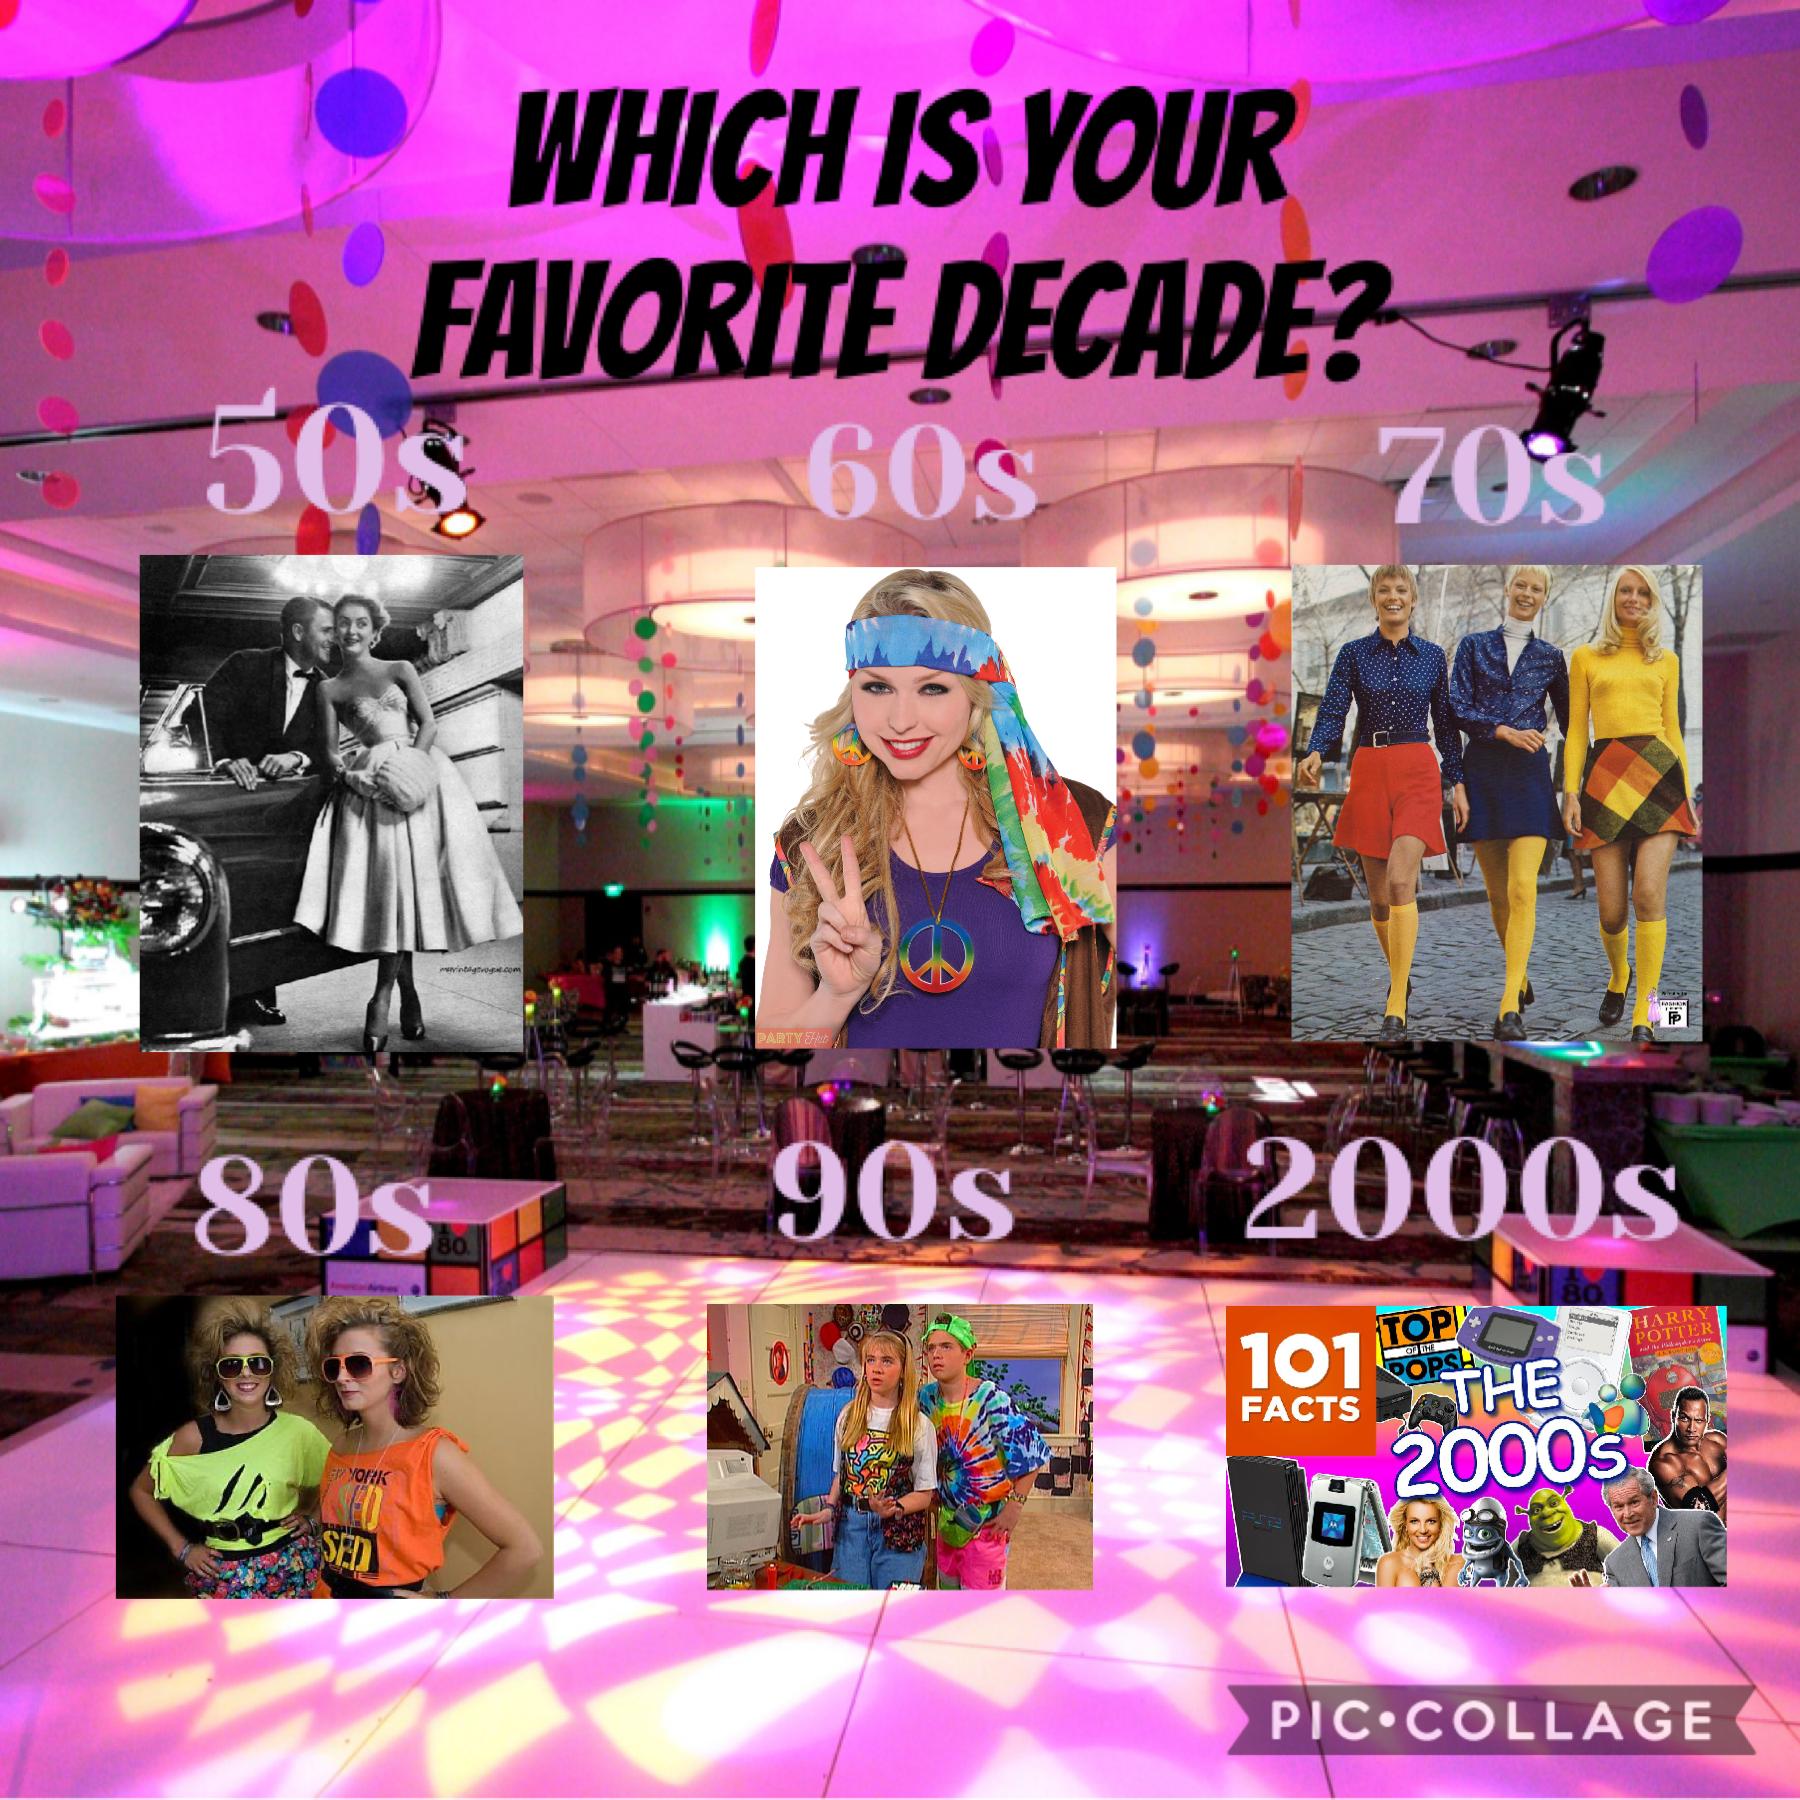 Which is your favorite decade?